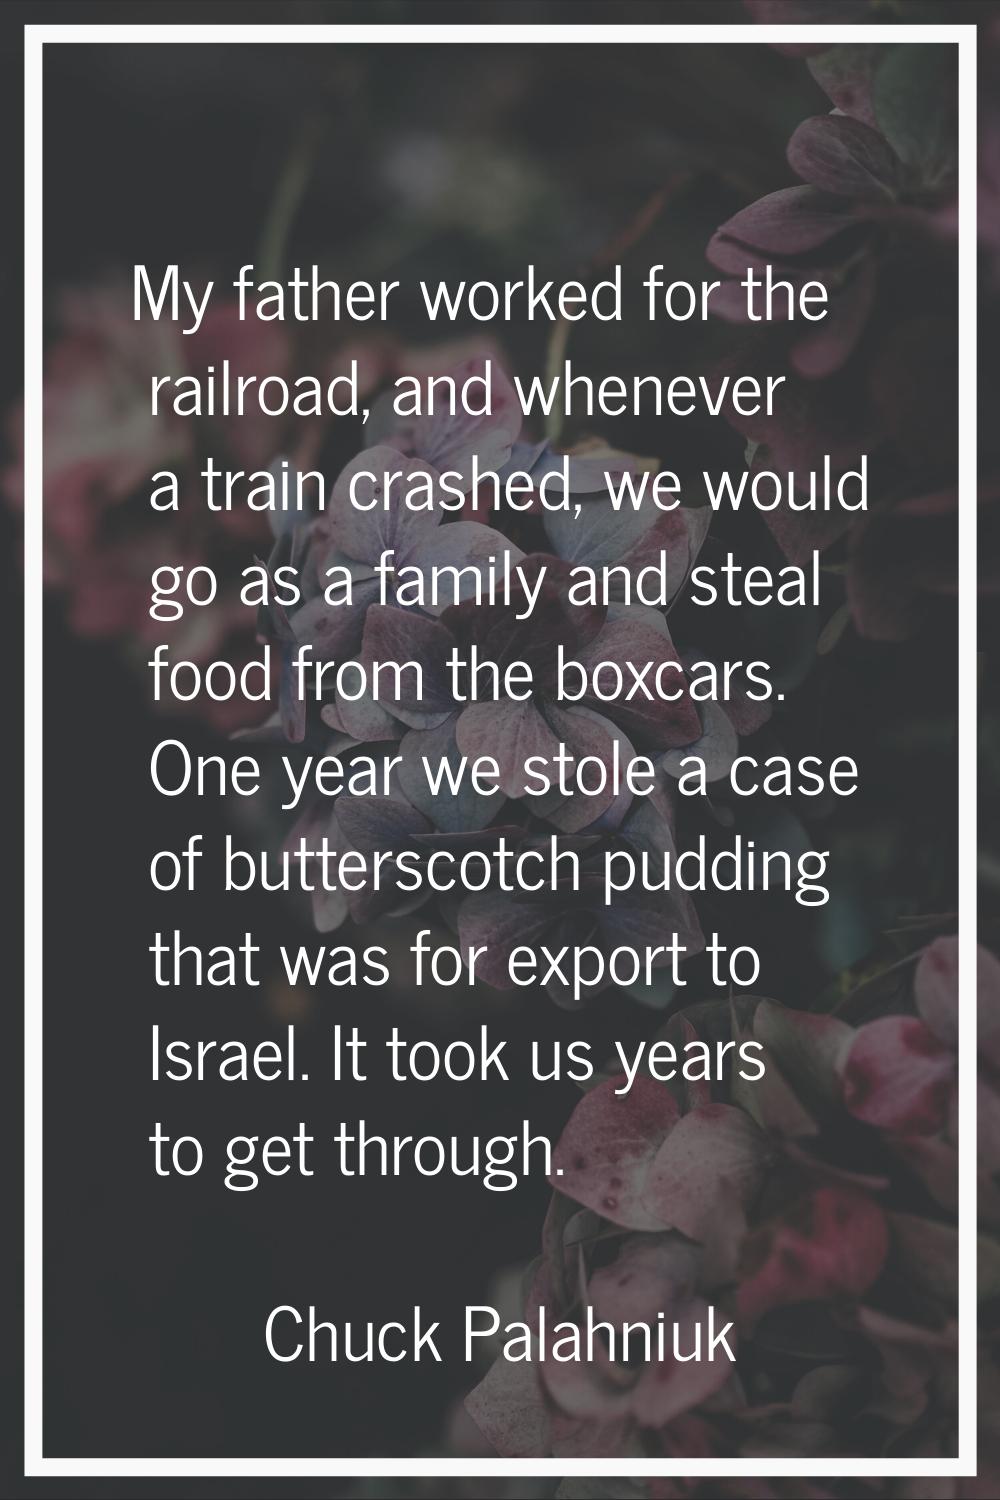 My father worked for the railroad, and whenever a train crashed, we would go as a family and steal 